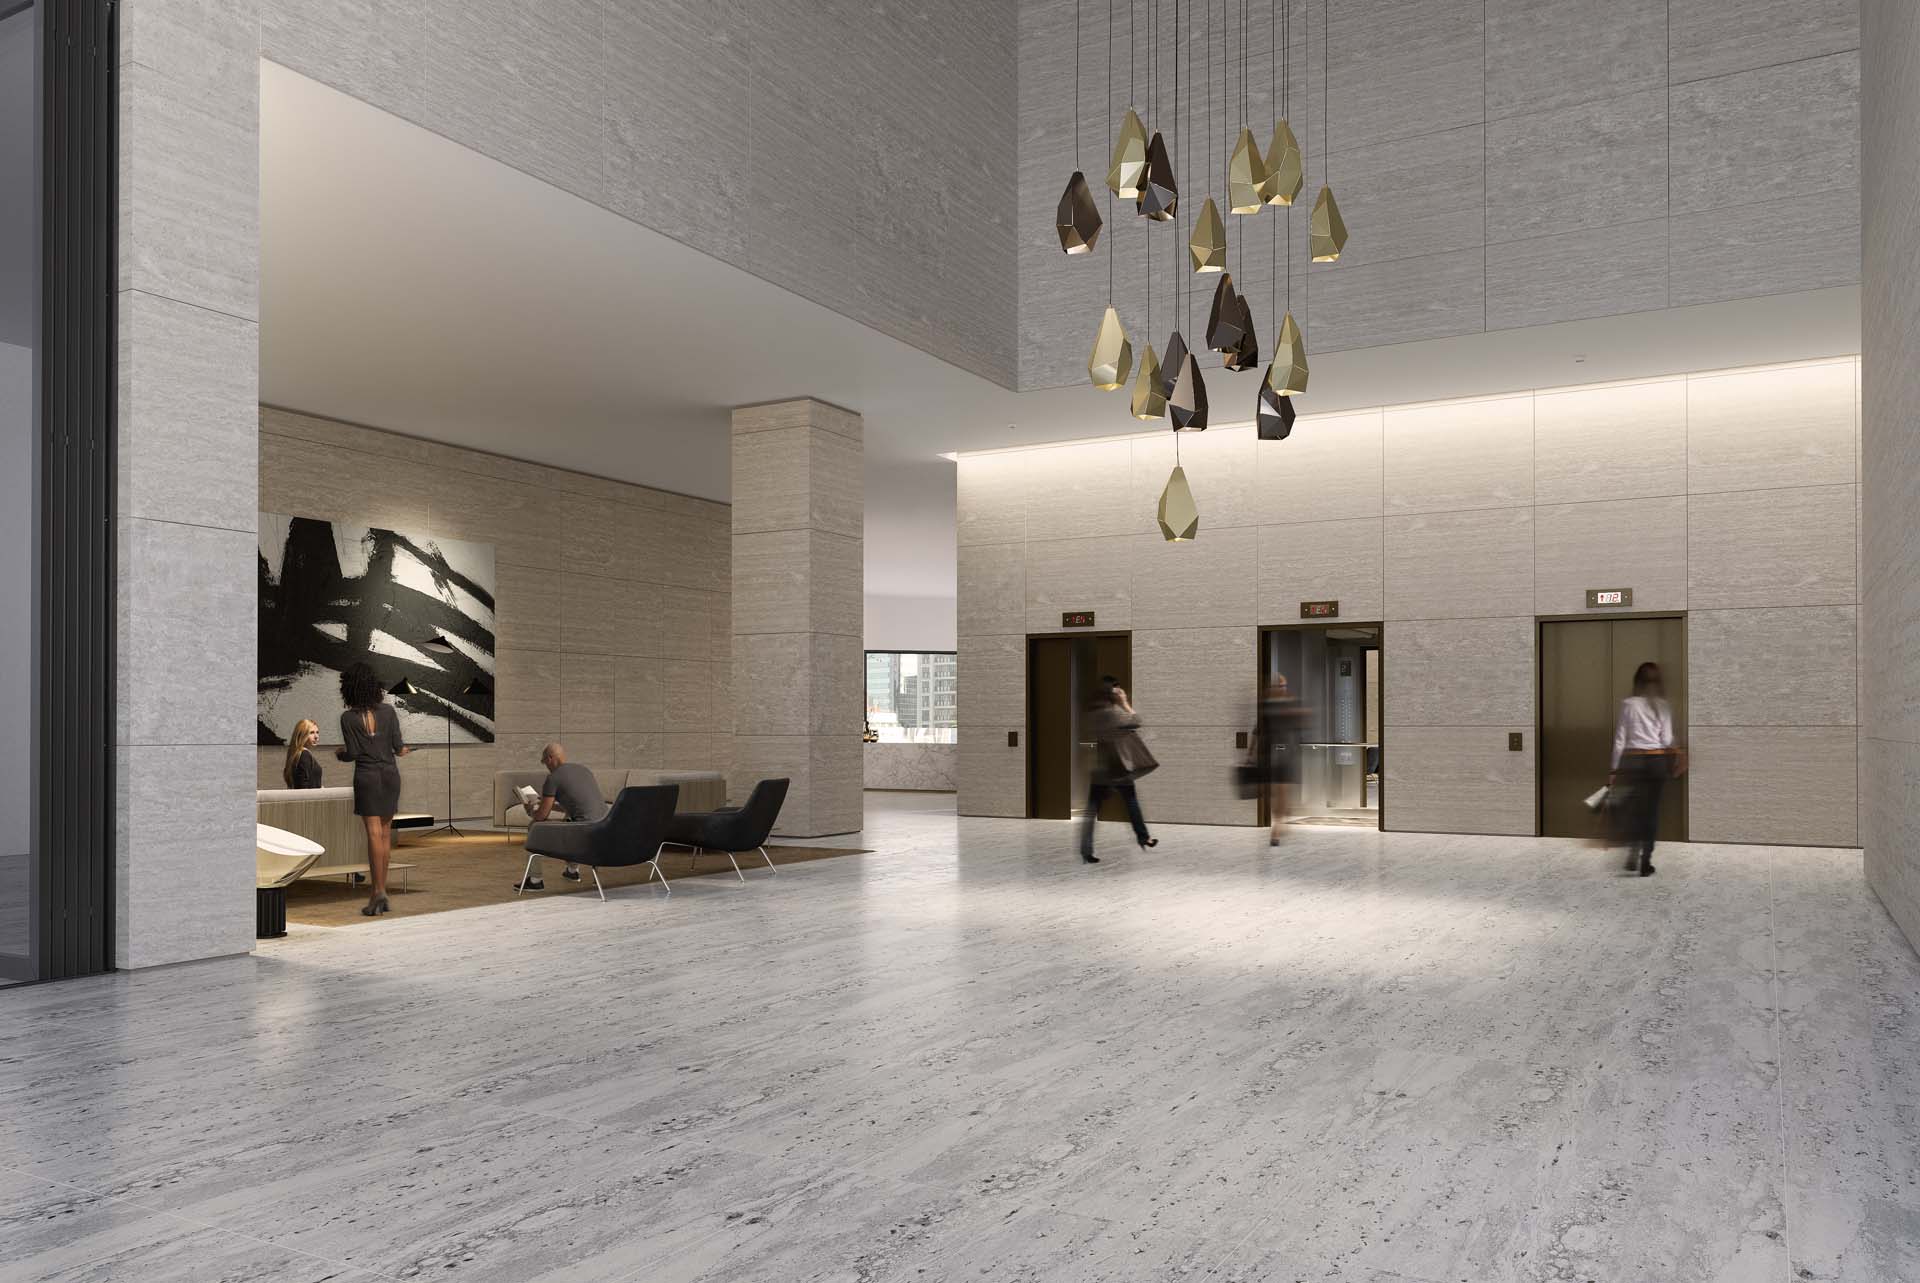 The International's lobby also connects to a private dining room, wine cellar and screening room to be shared by the building's residents. 